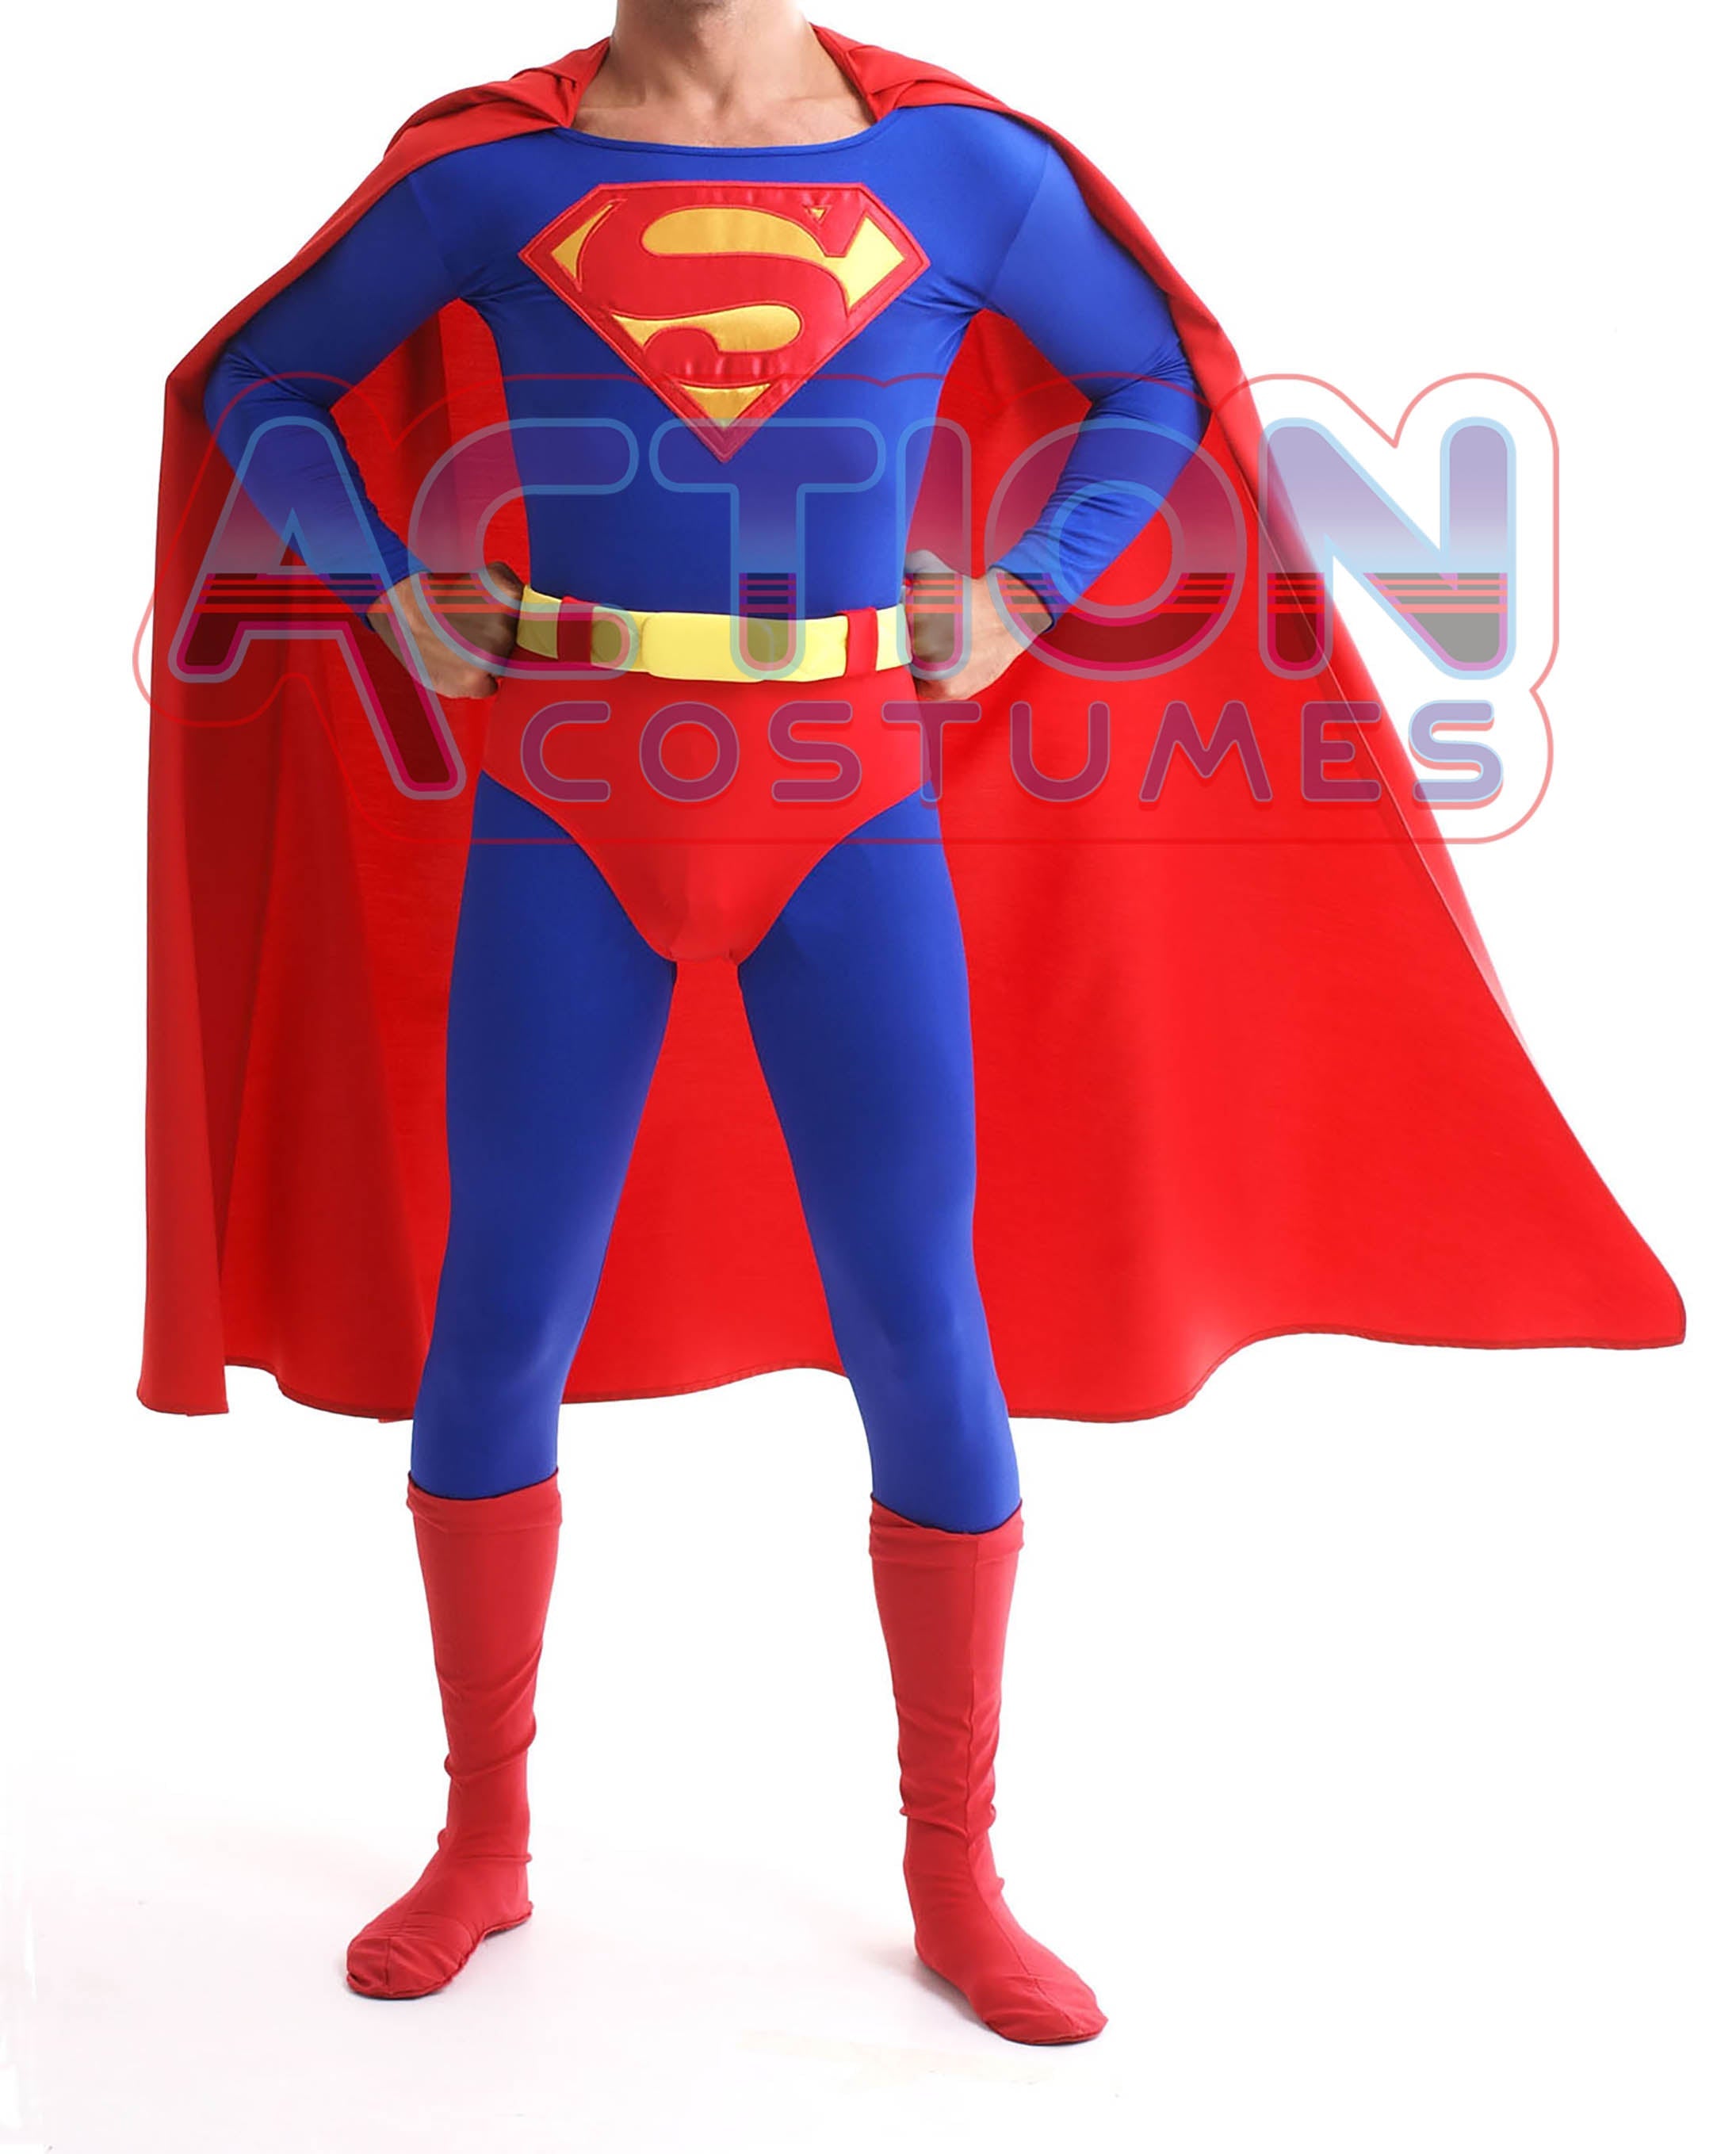 superman-deluxe-costume-90-s-style-l-size-ready-to-ship